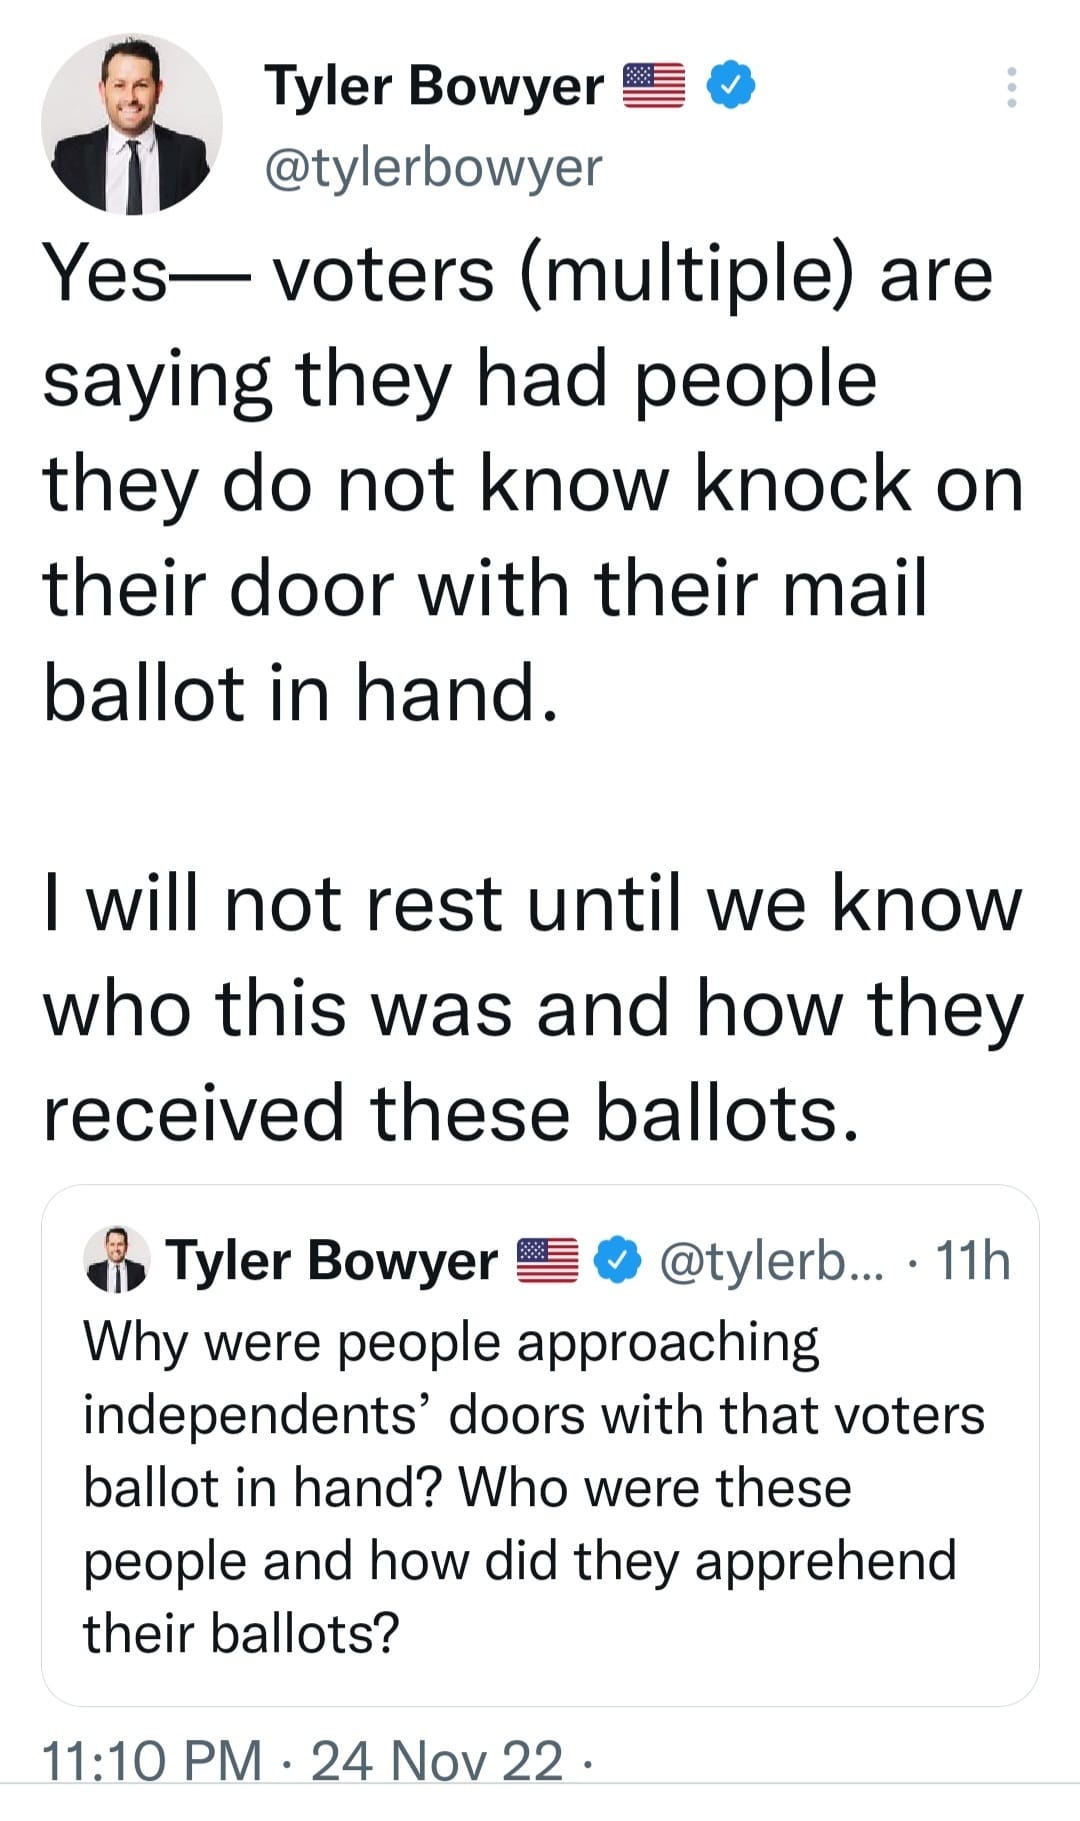 May be an image of 1 person and text that says 'Tyler Bowyer @tylerbowyer Yes- voters (multiple) are saying they had people they do not know knock on their door with their mail ballot in hand. I will not rest until we know who this was and how they received these ballots. 11h Tyler Bowyer @tylerb... Why were people approaching independents doors with that voters ballot in hand? Who were these people and how did they apprehend their ballots? 11:10 PM 24 Nov 22. 22'